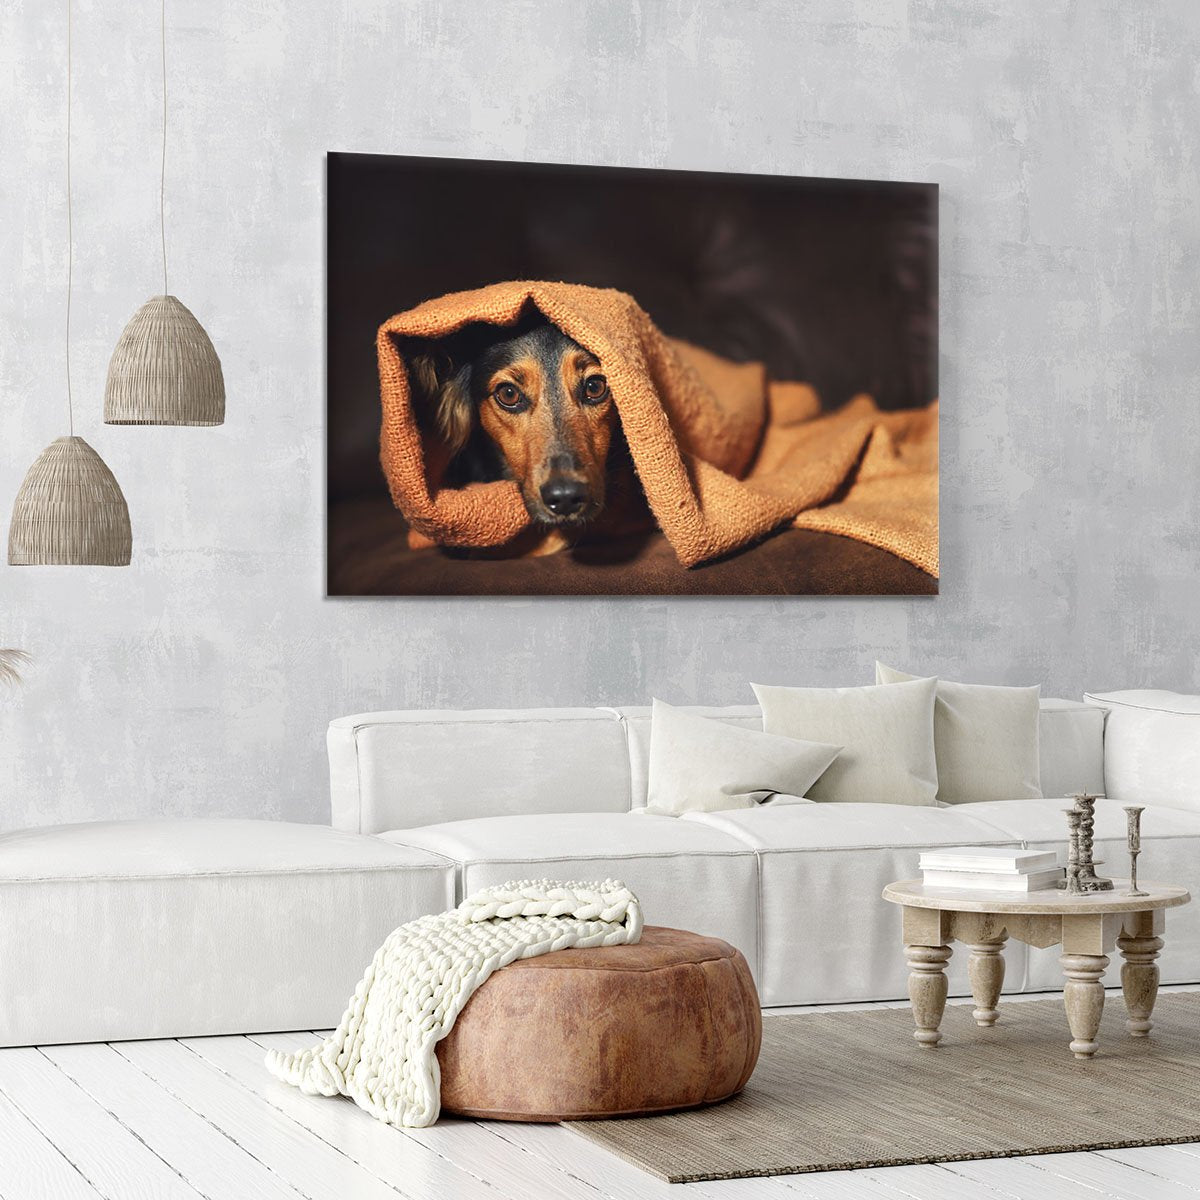 Small black and brown dog hiding under orange blanket Canvas Print or Poster